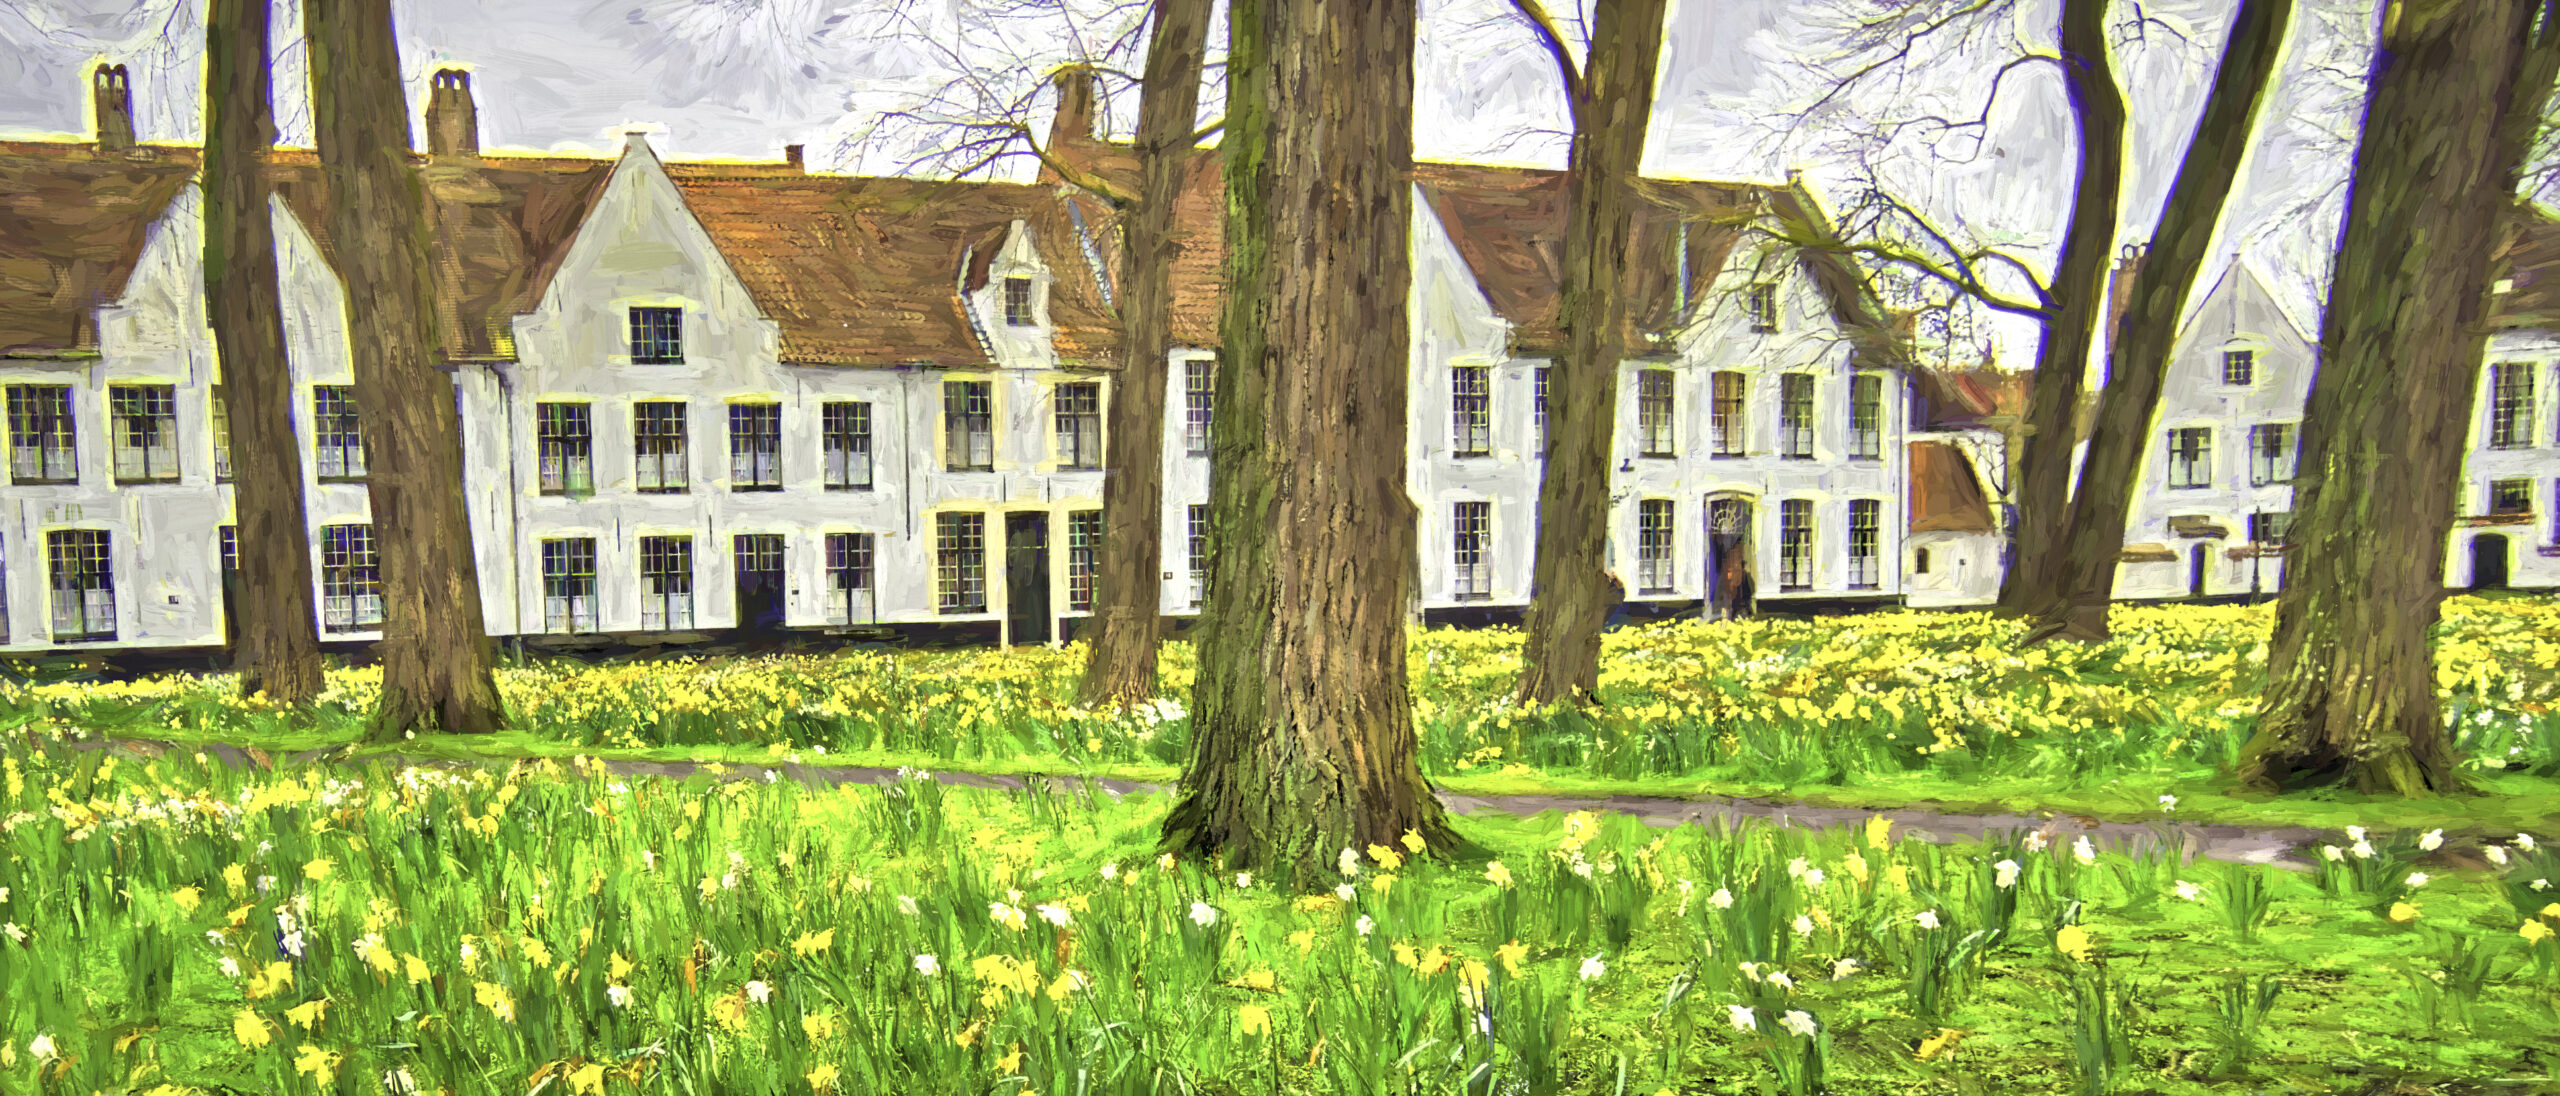 Daffodils bloom below the trees at an old convent in Bruges, Belgium